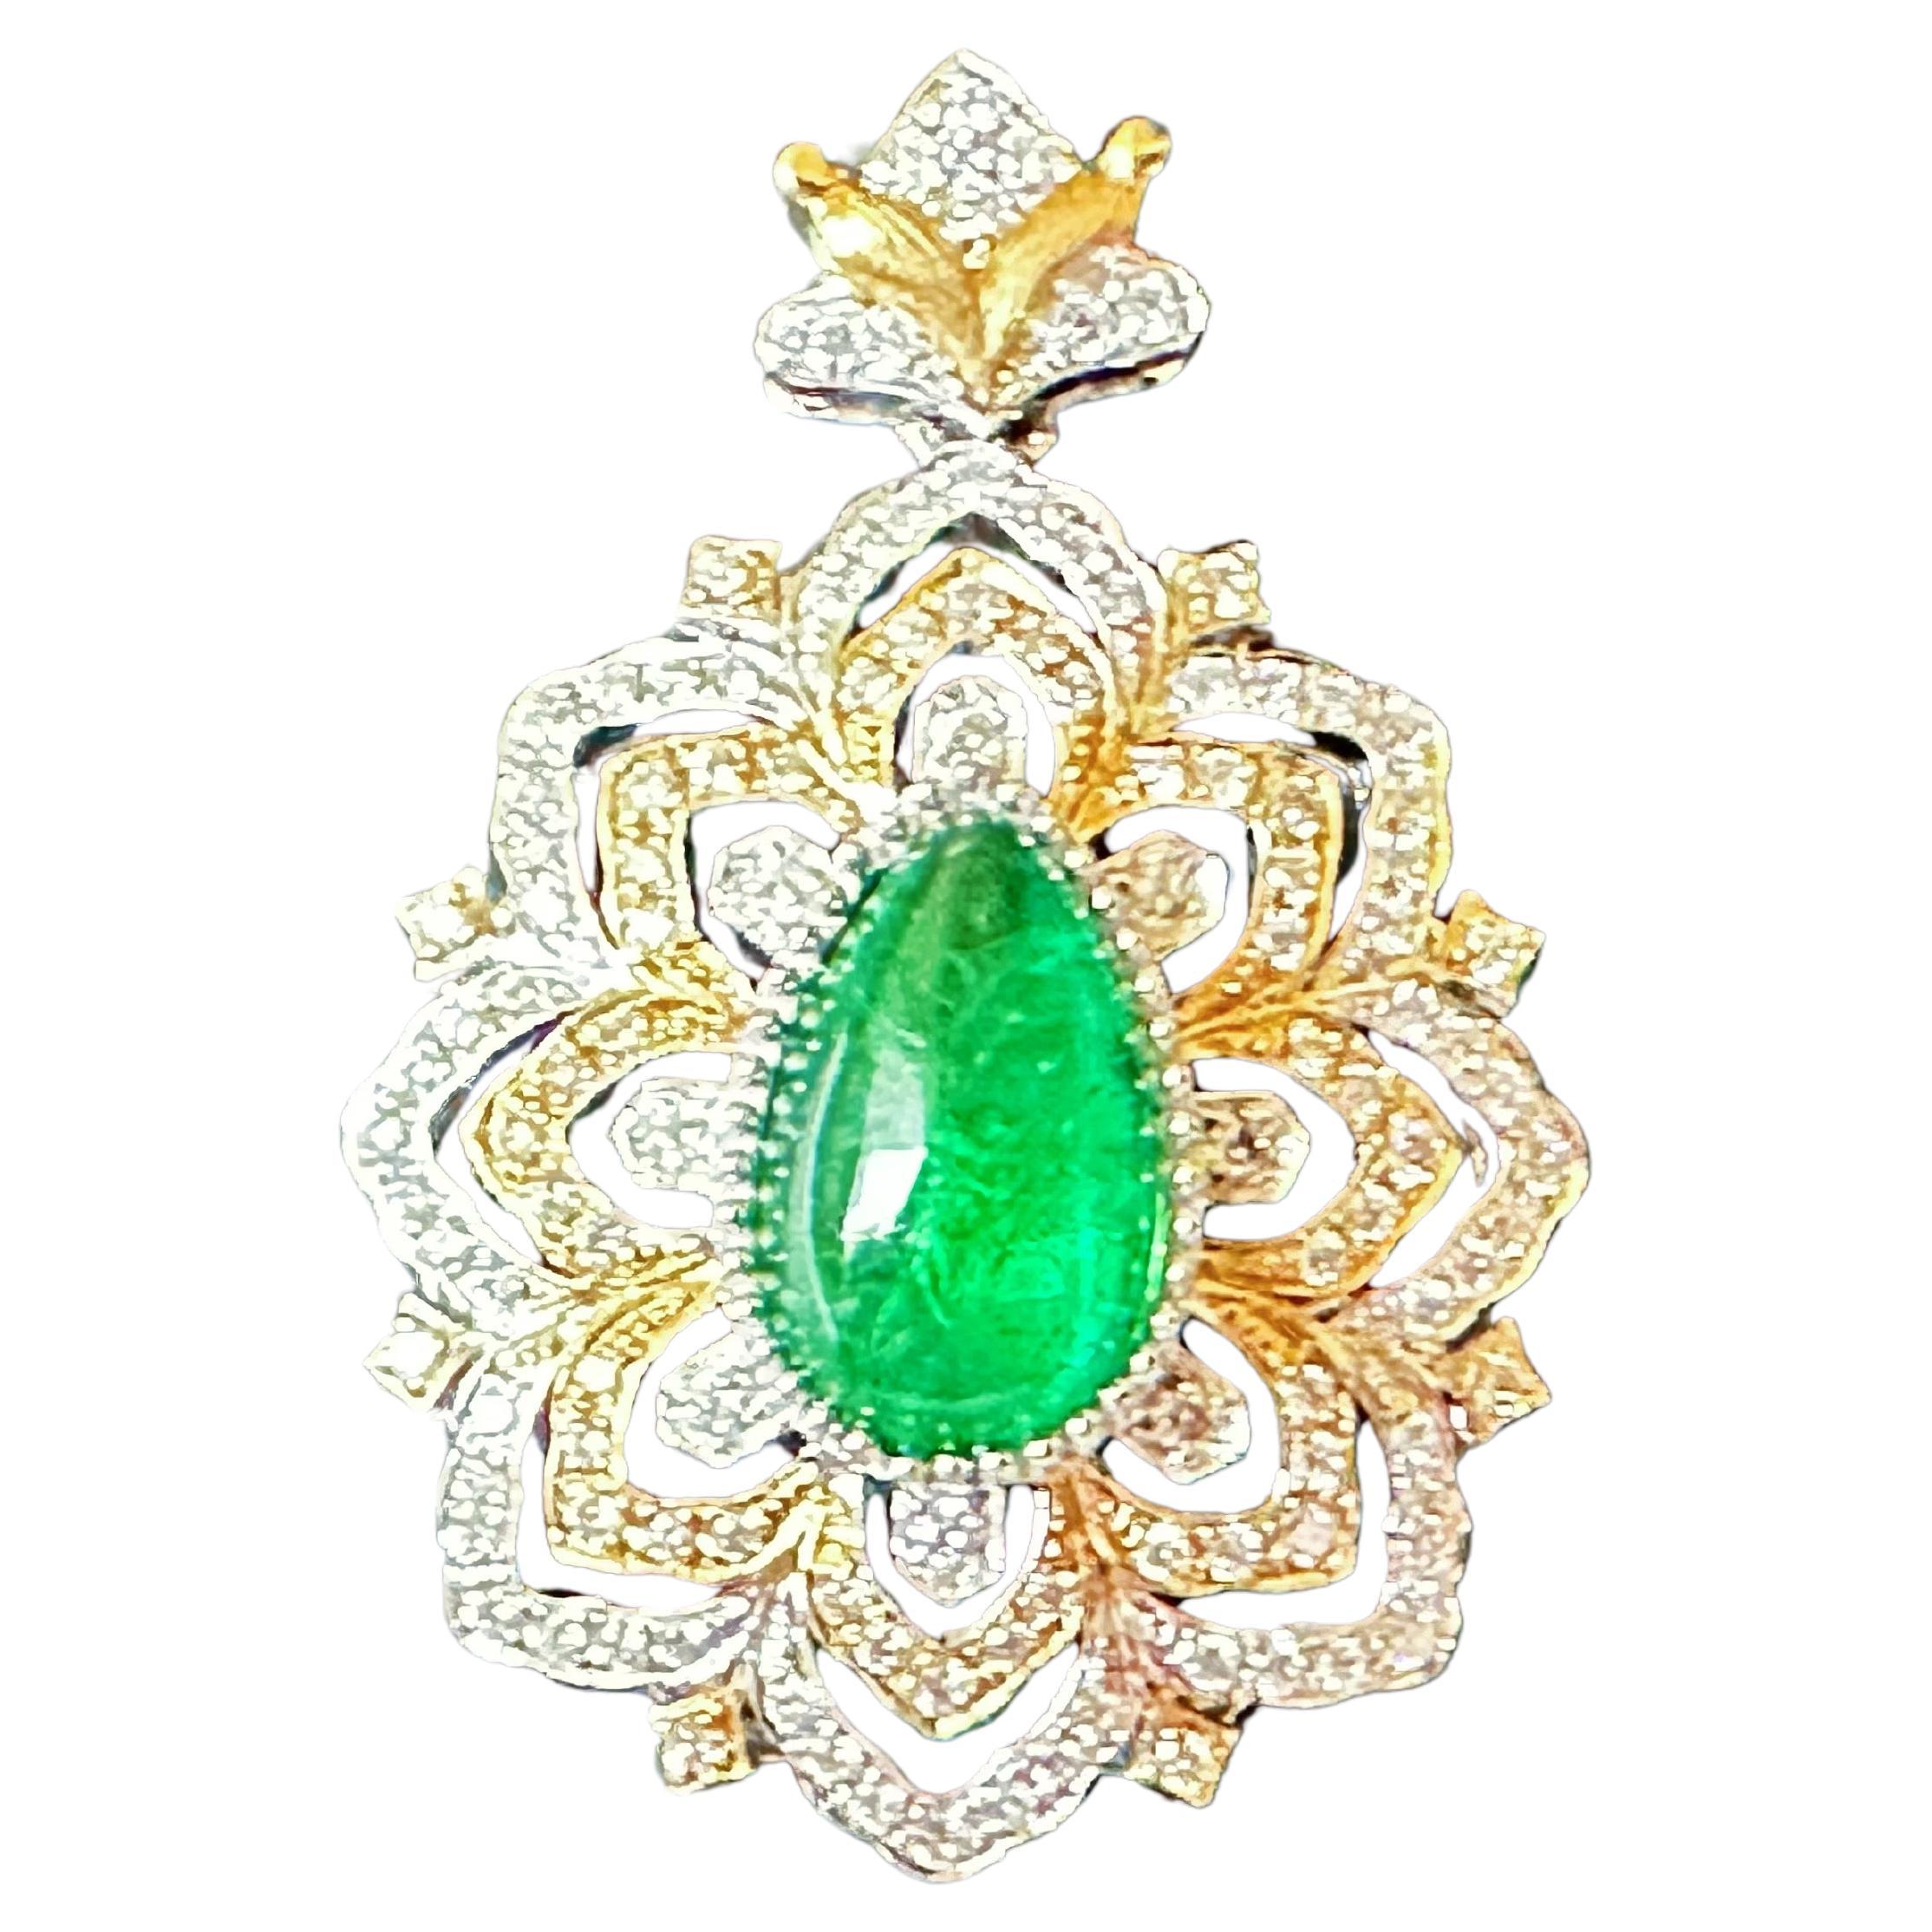 Certified Natural Vivid Green Drop Shape Emerald Pendant in 14K Gold and Diamond For Sale